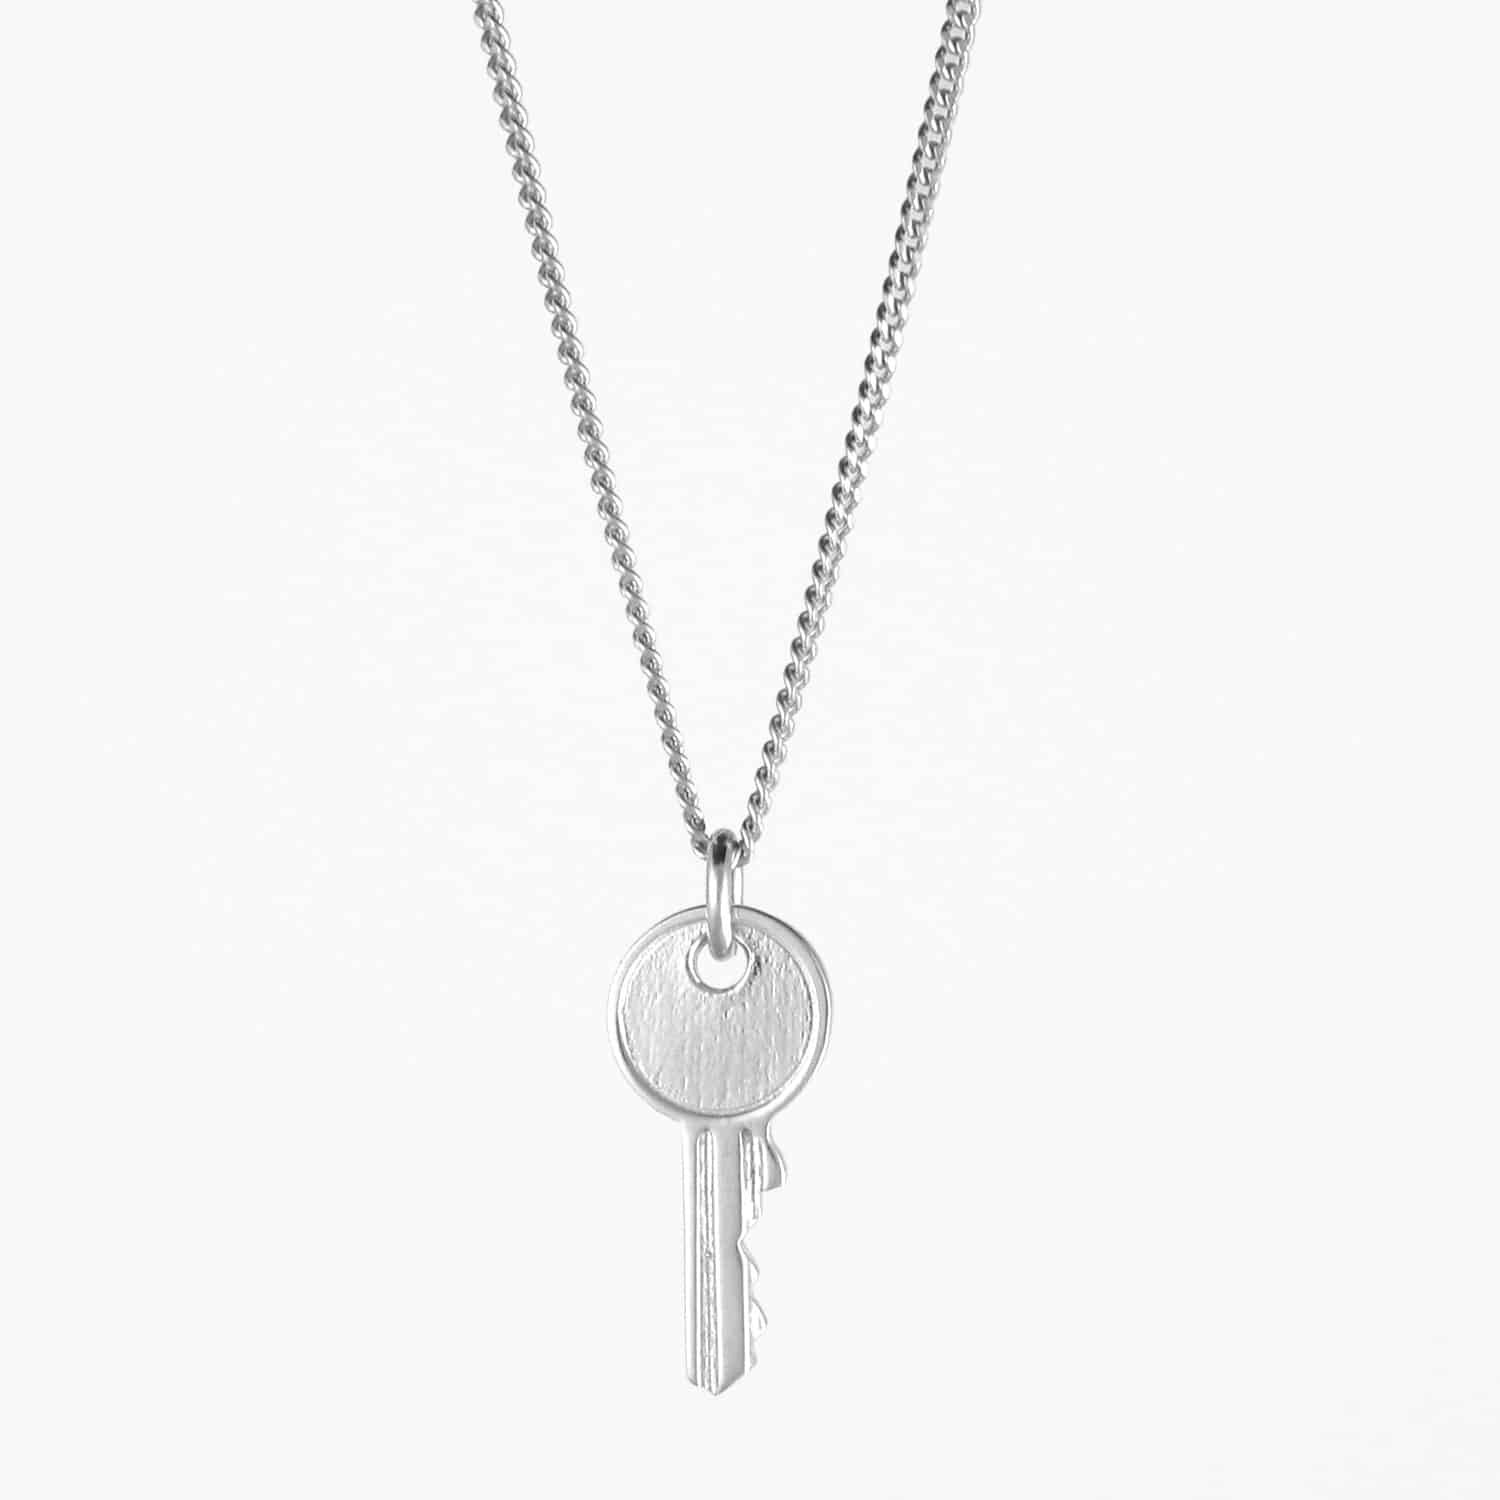 Small Key Necklace Silver, Sterling Silver & Gold Vermeil Jewellery